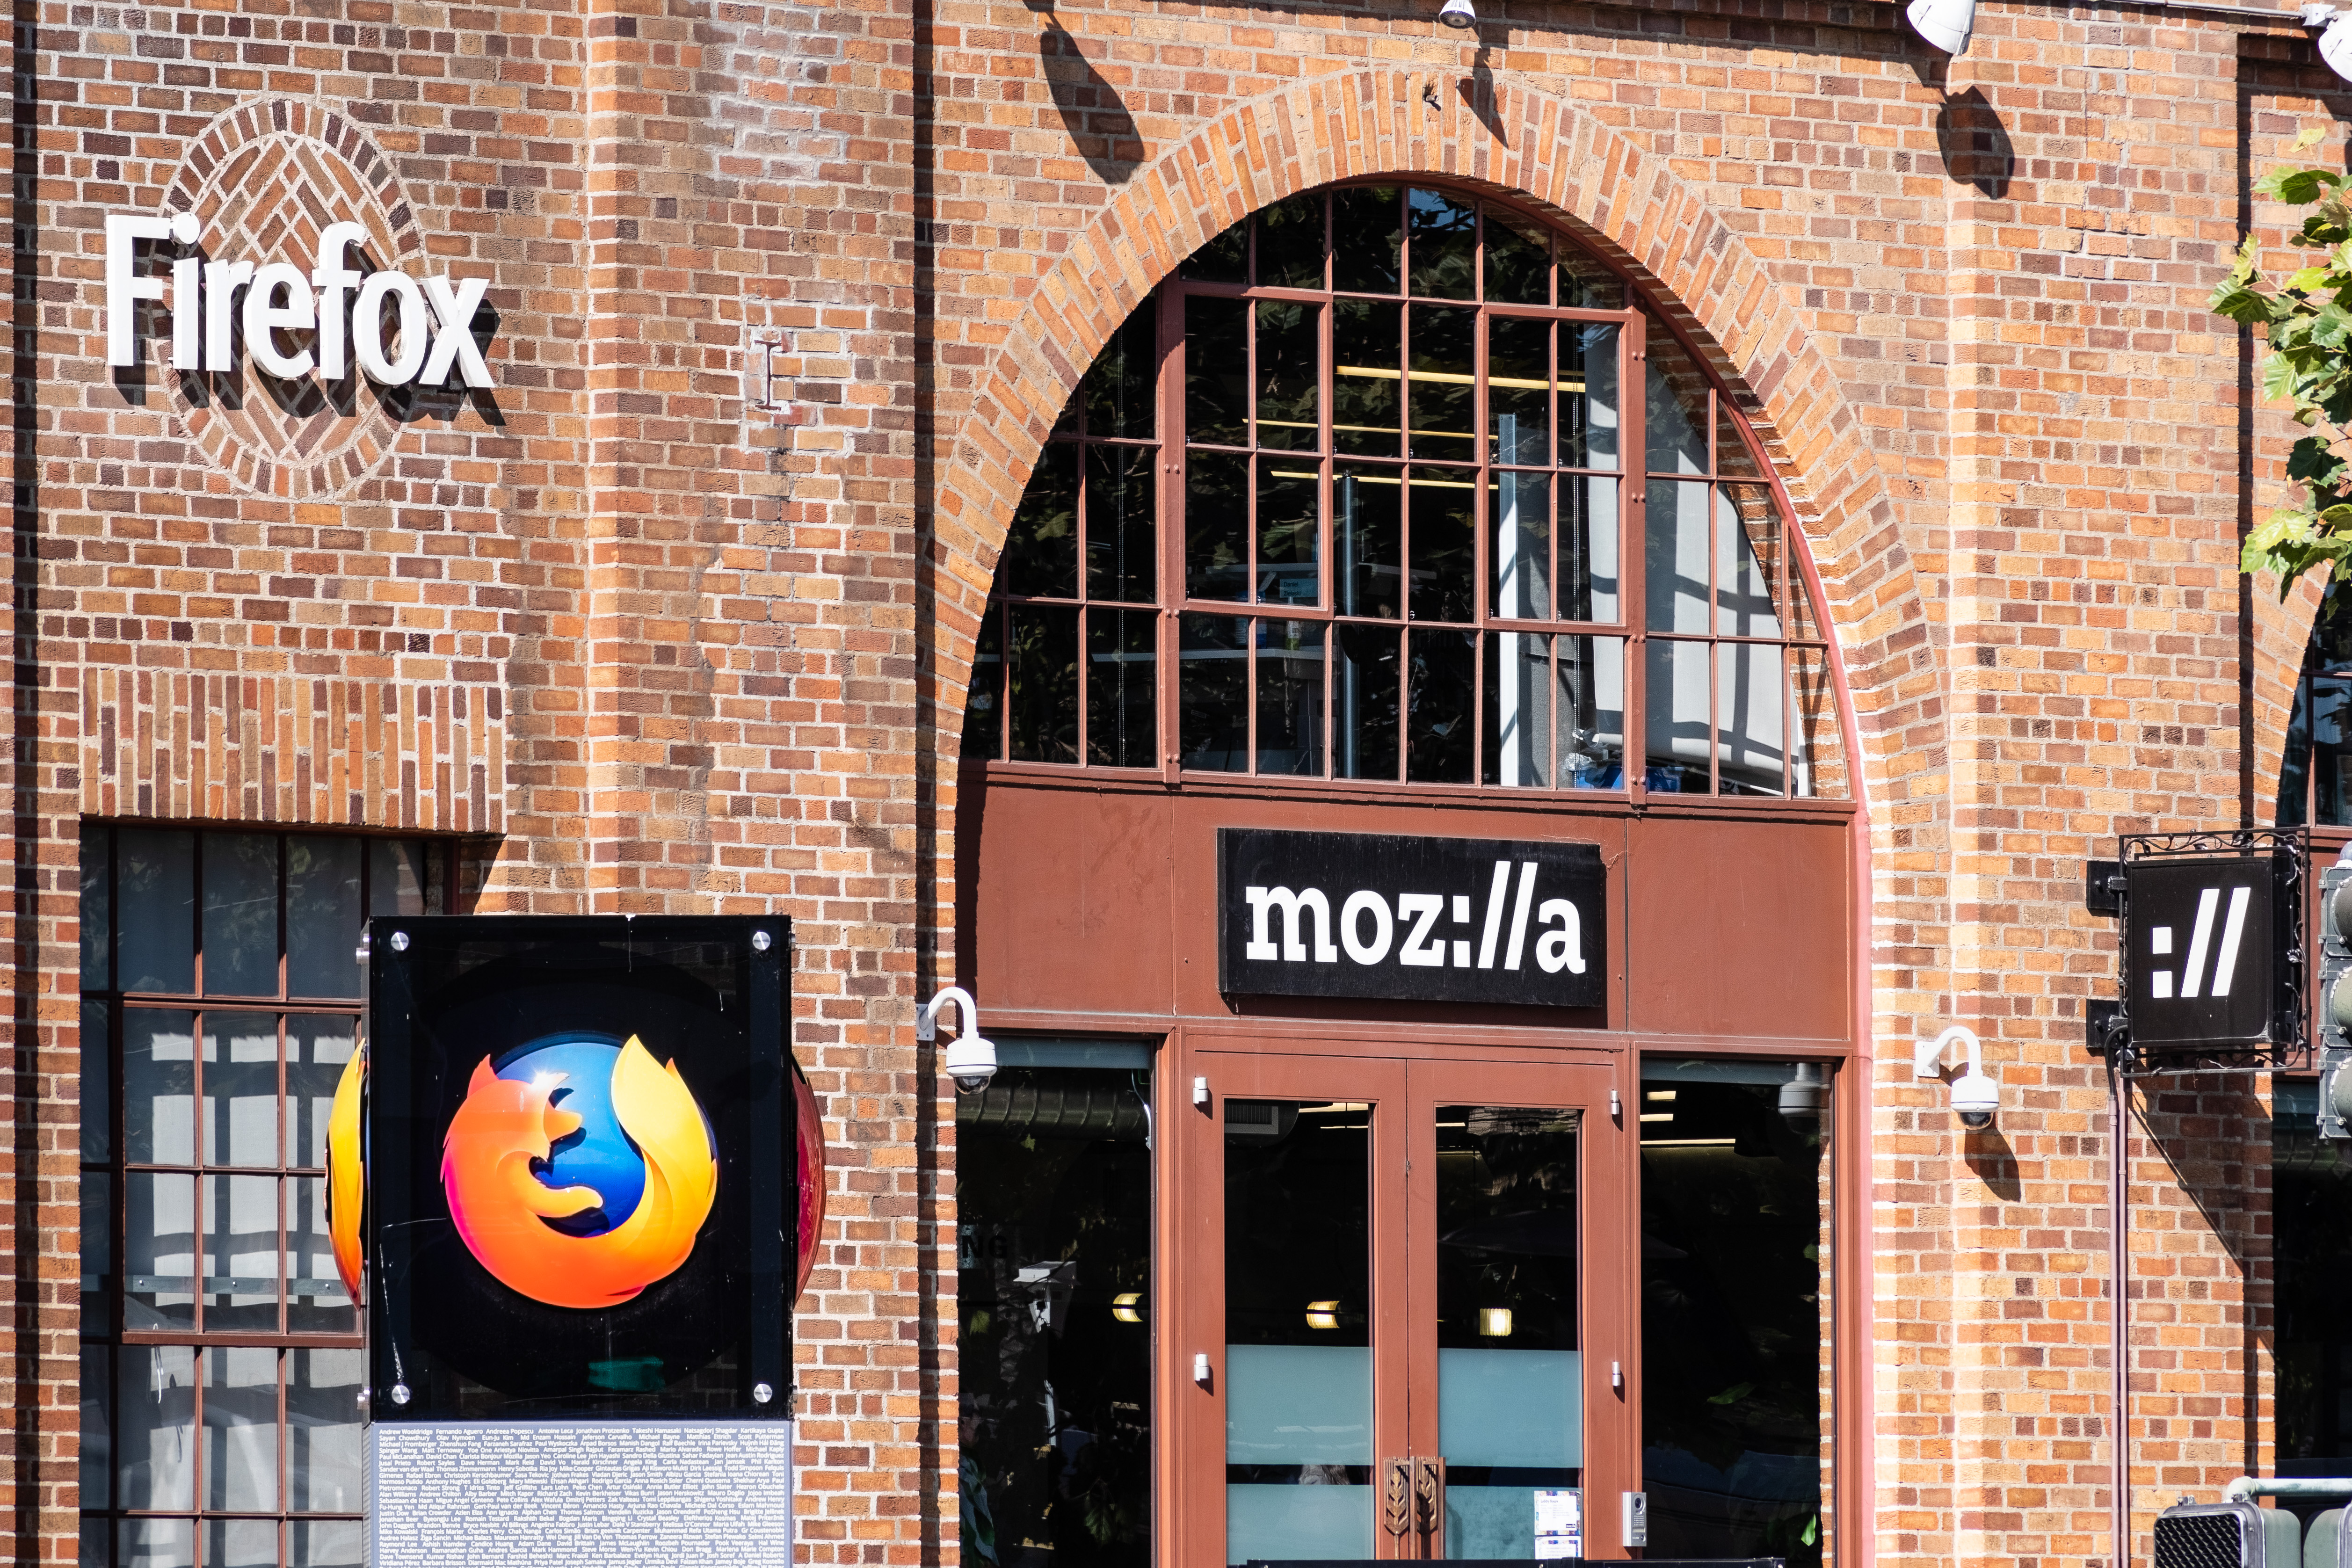 Mozilla bundles its VPN and email relay services for $7 per month